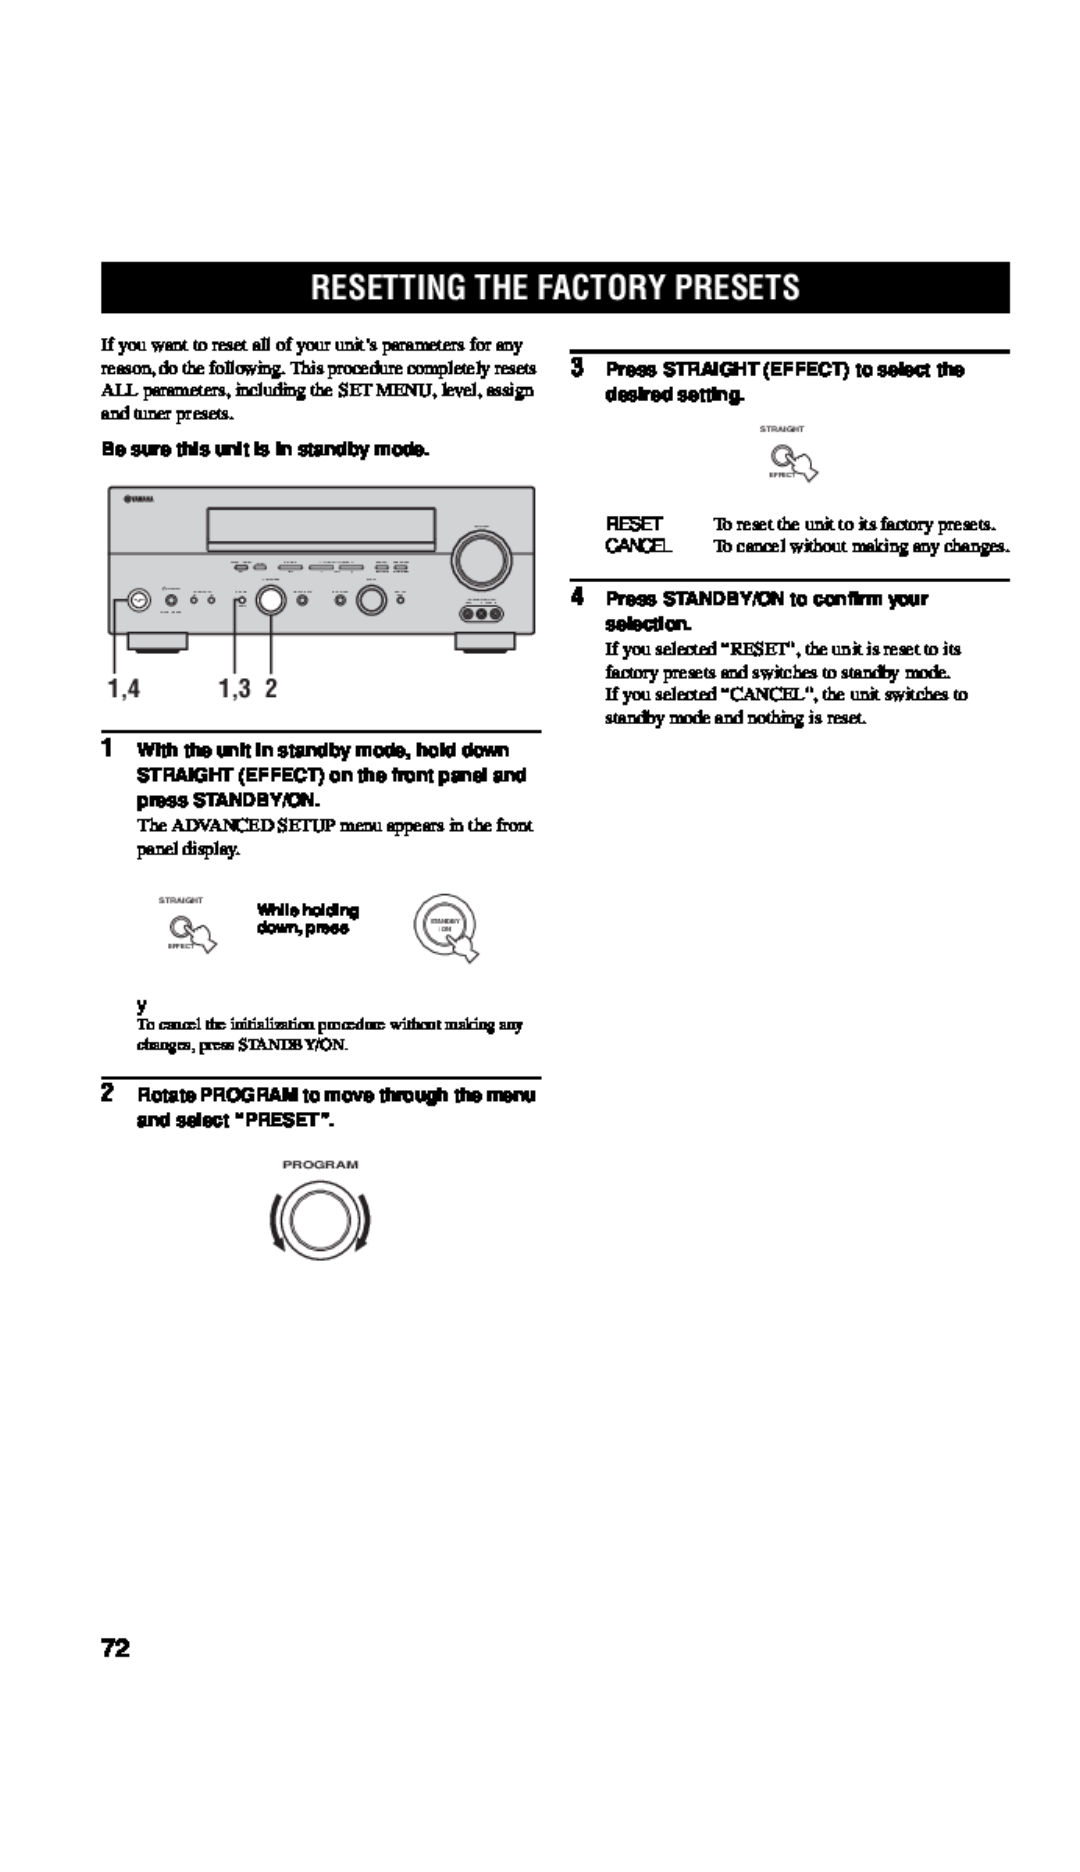 Yamaha RX-V557 owner manual Resetting The Factory Presets, Be sure this unit is in standby mode 